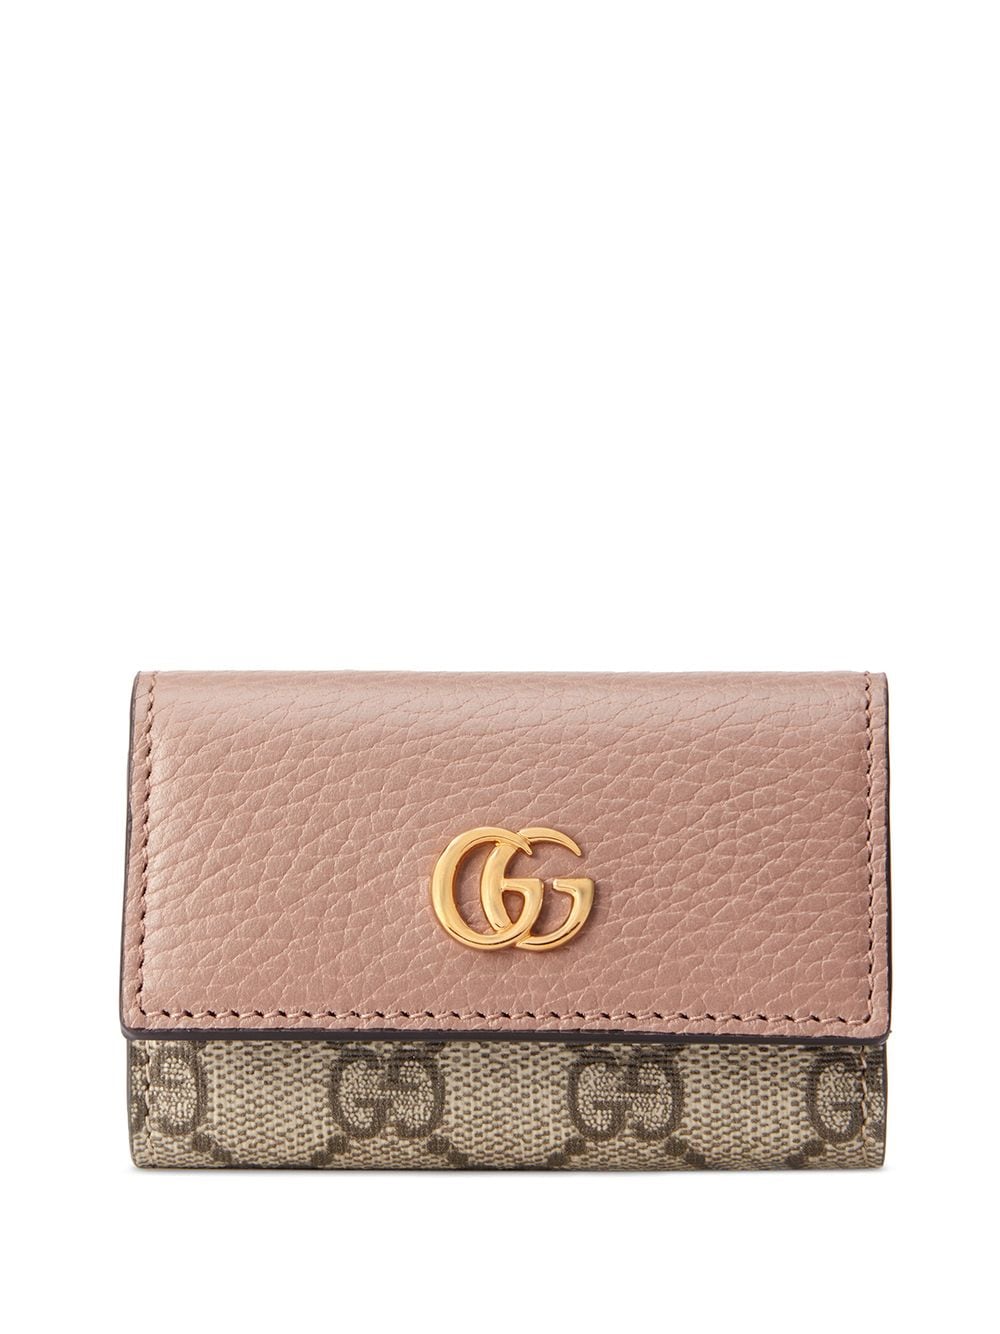 Gucci Signature Leather Key Case in Red